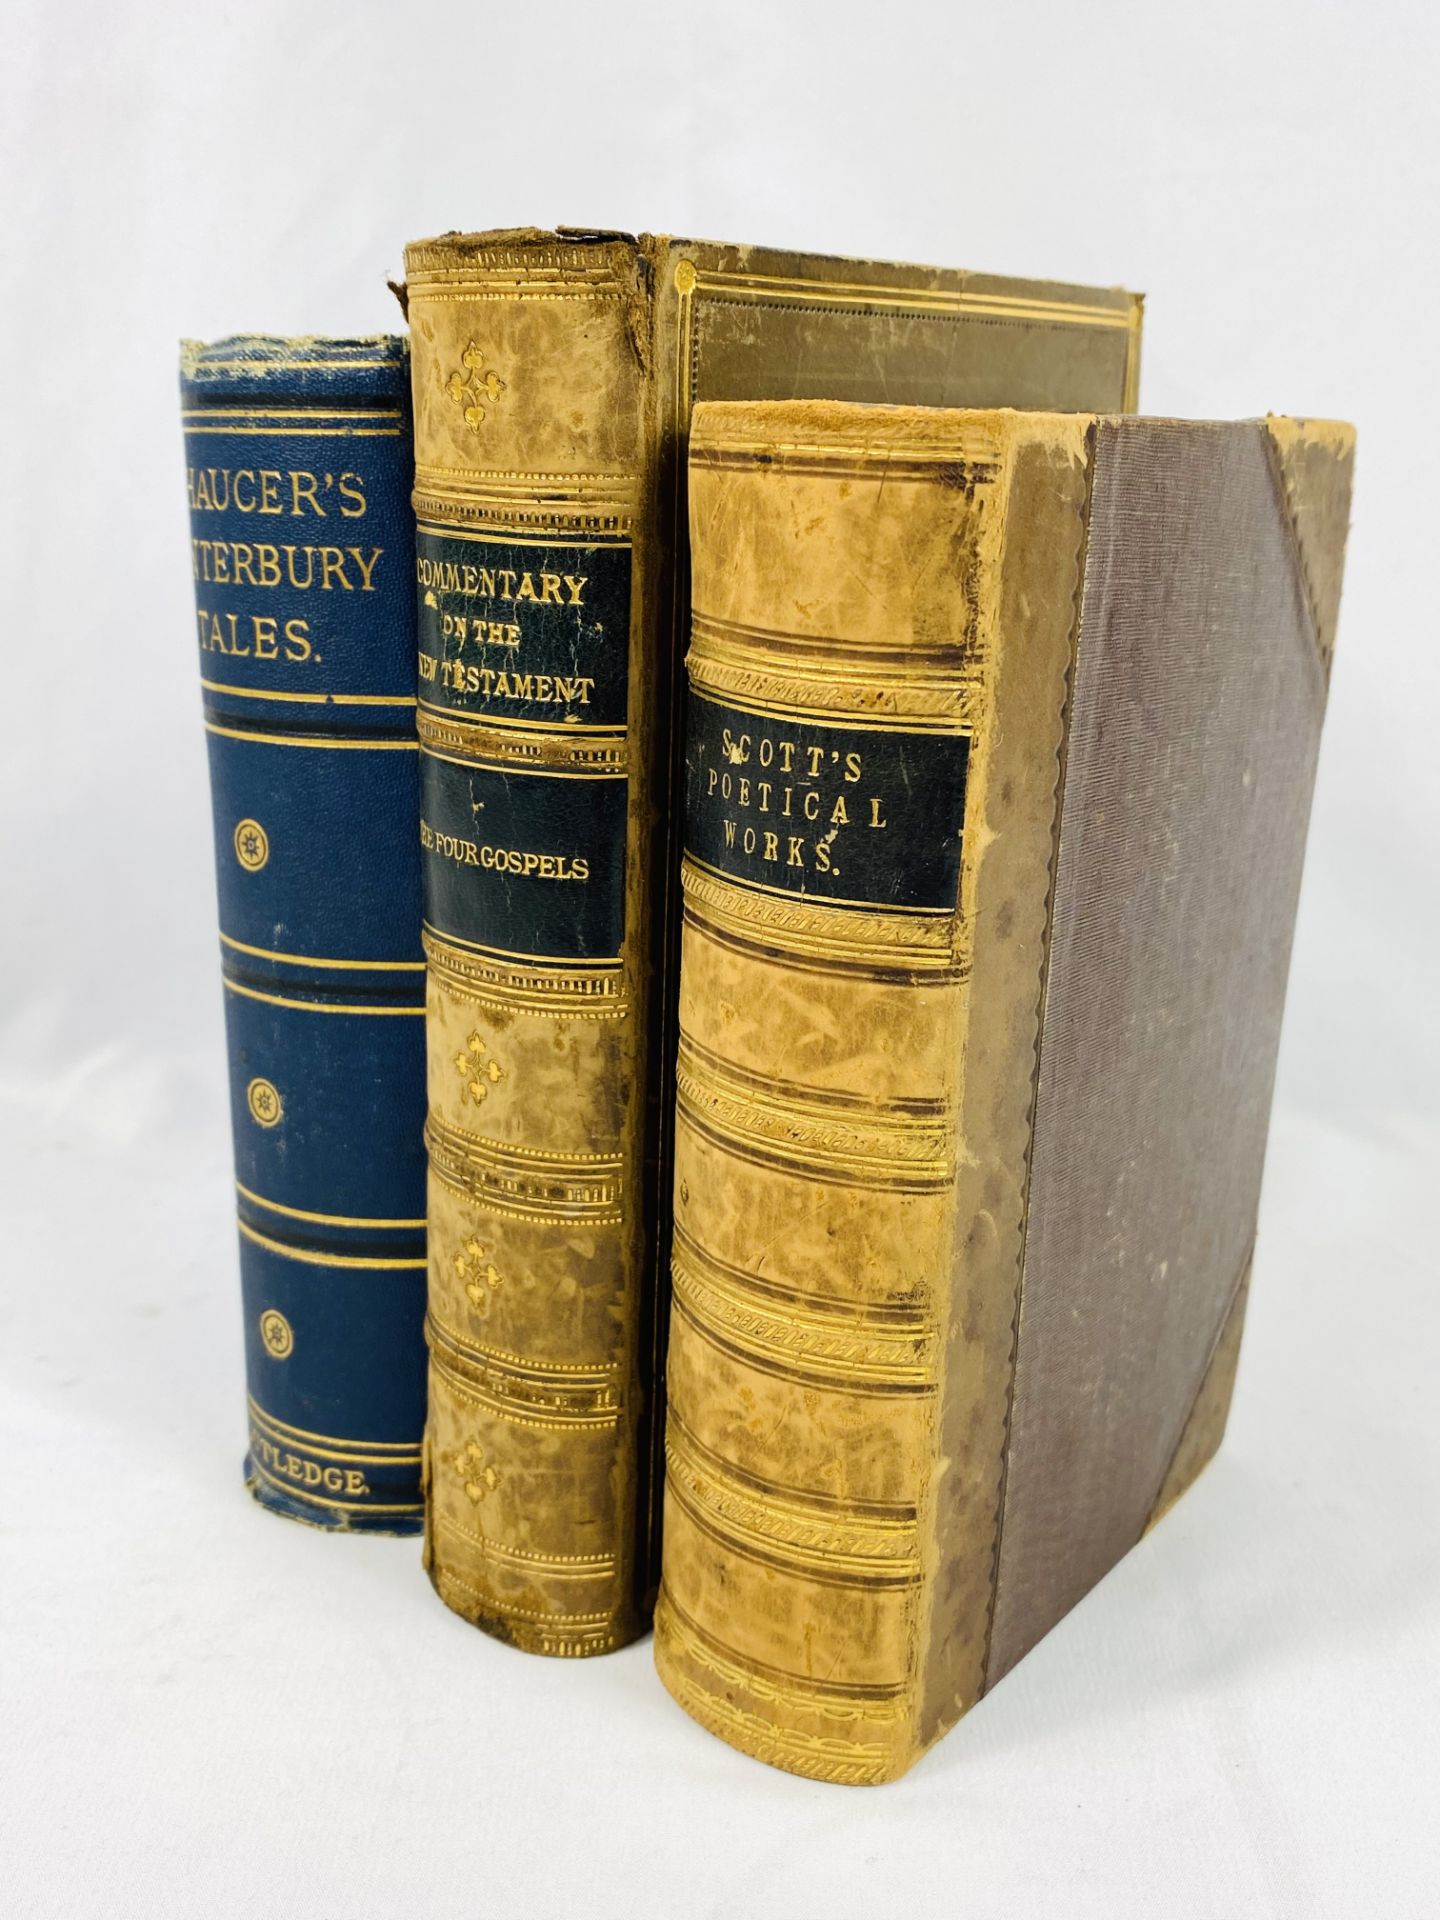 The Poetical Works of Sir Walter Scott and other works - Image 6 of 6